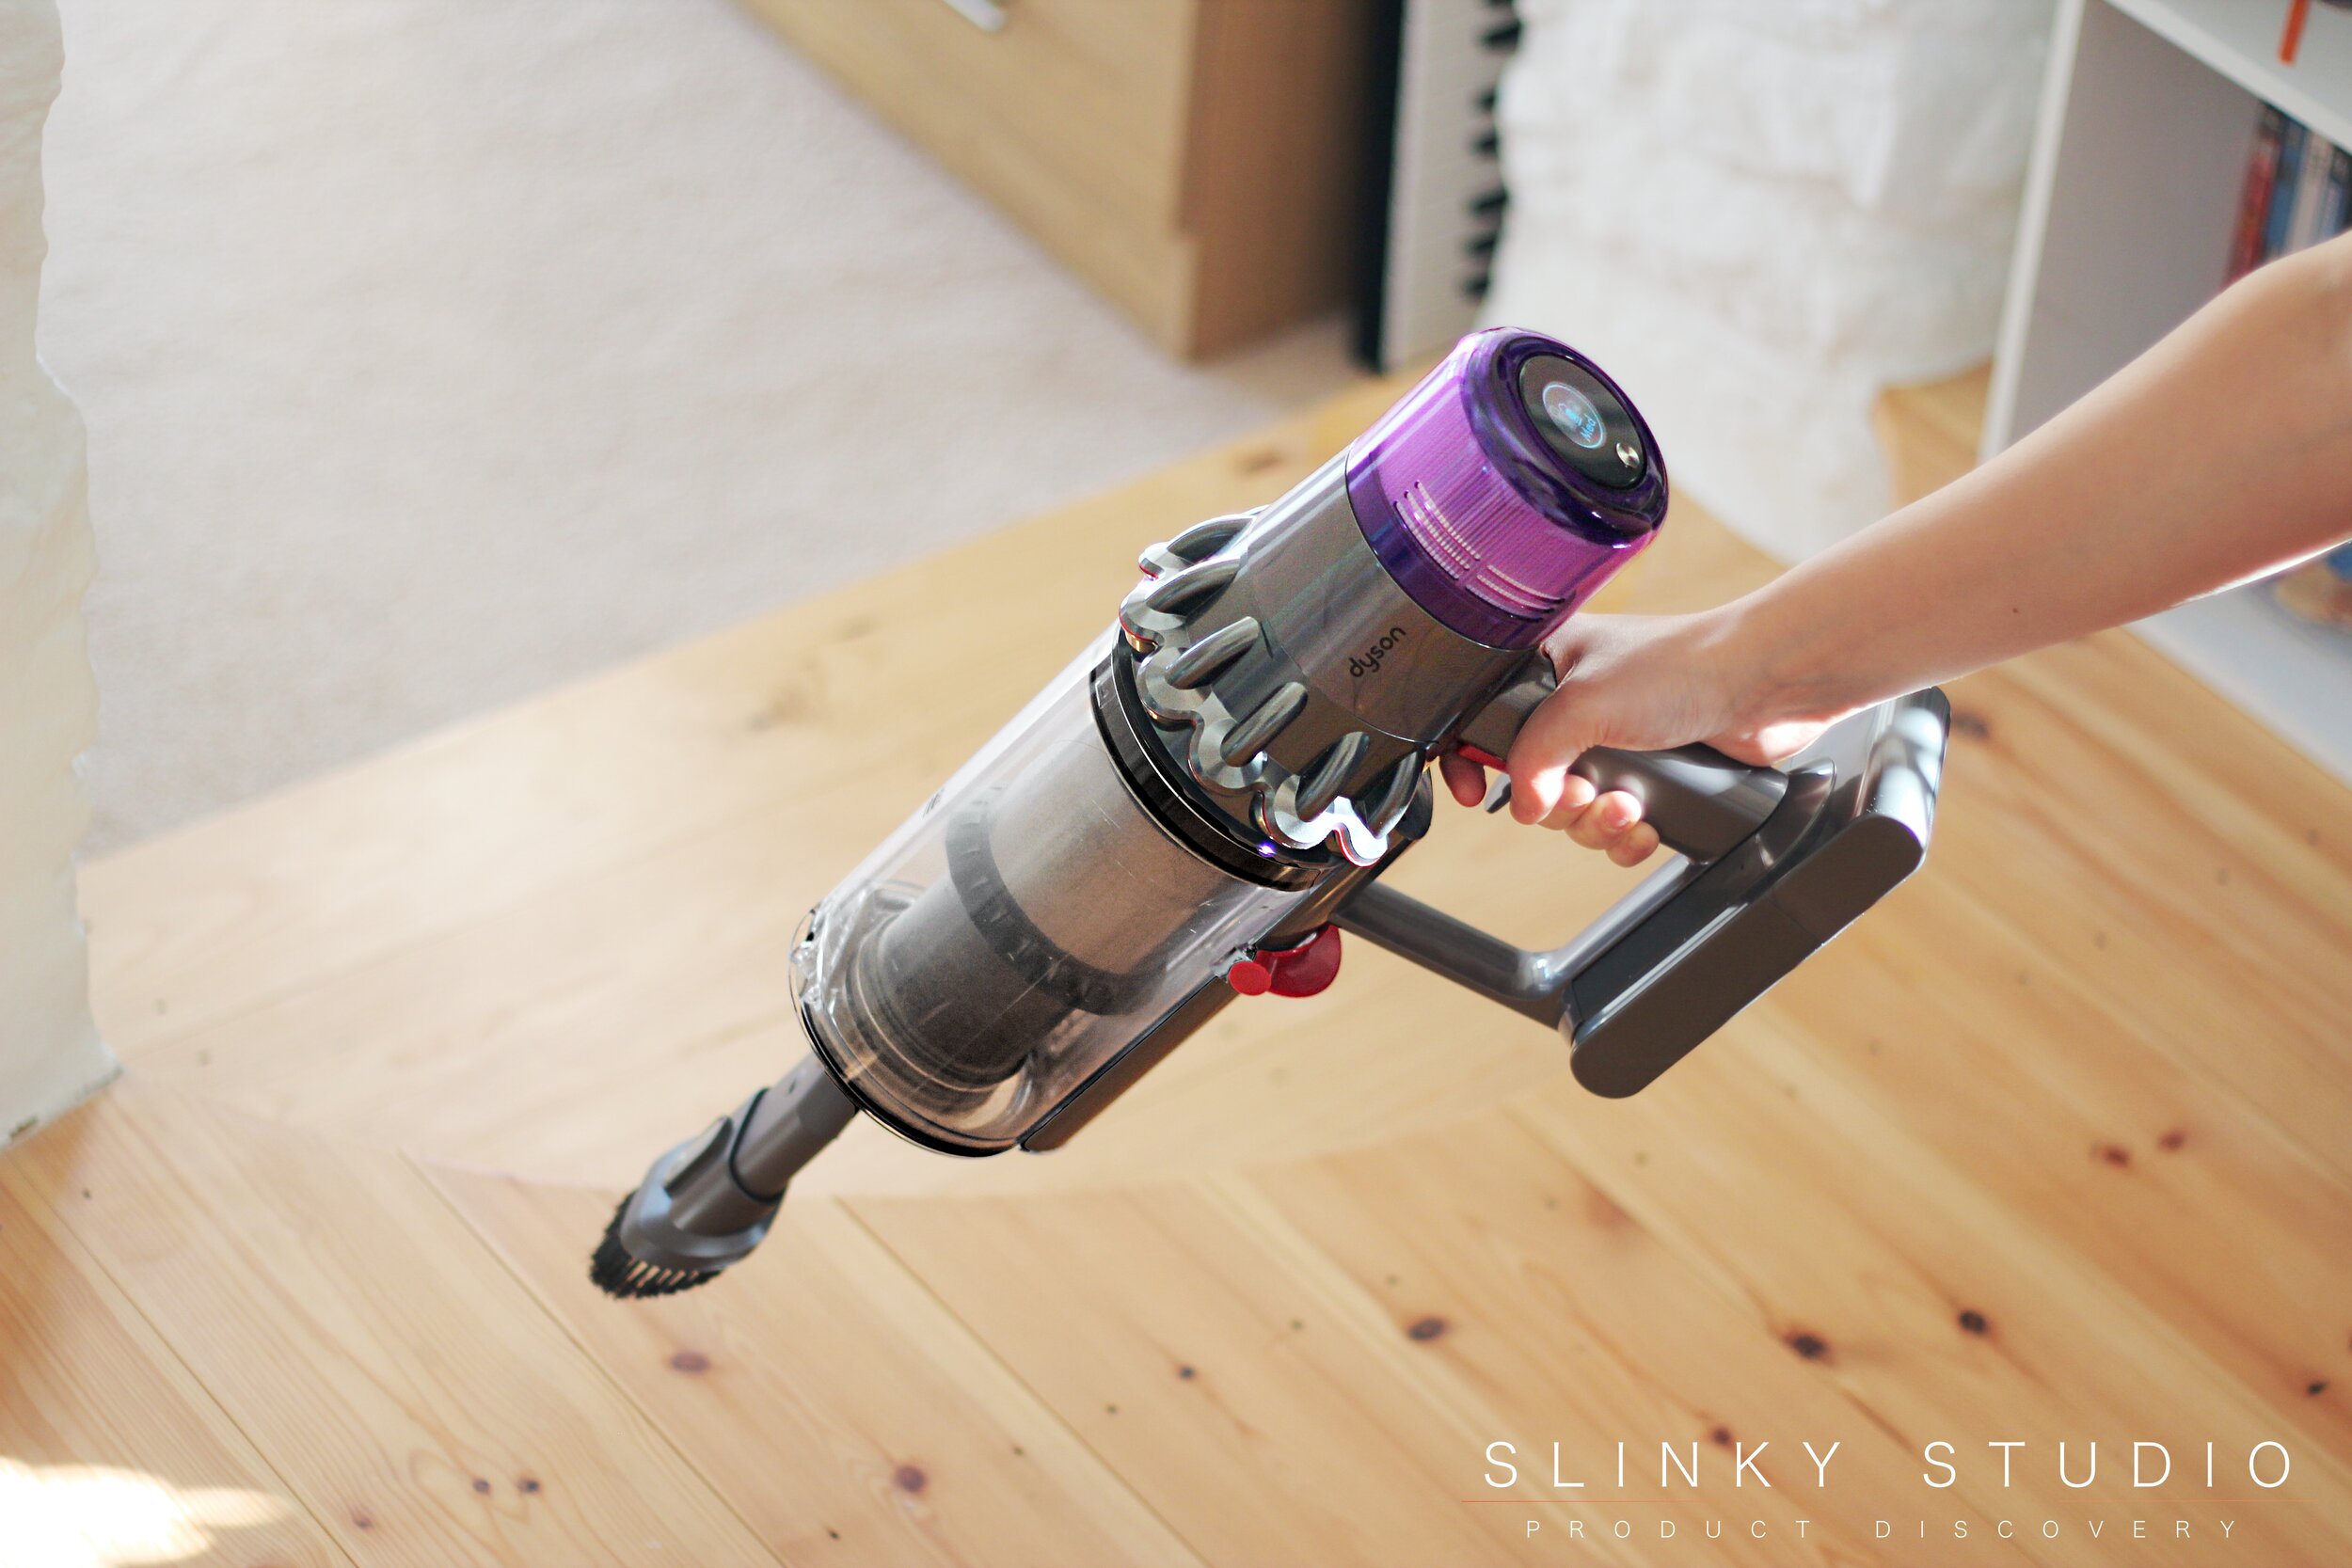 Aanbeveling limoen factor Dyson V11 Absolute Review: Intelligent cleaning - Slinky Studio